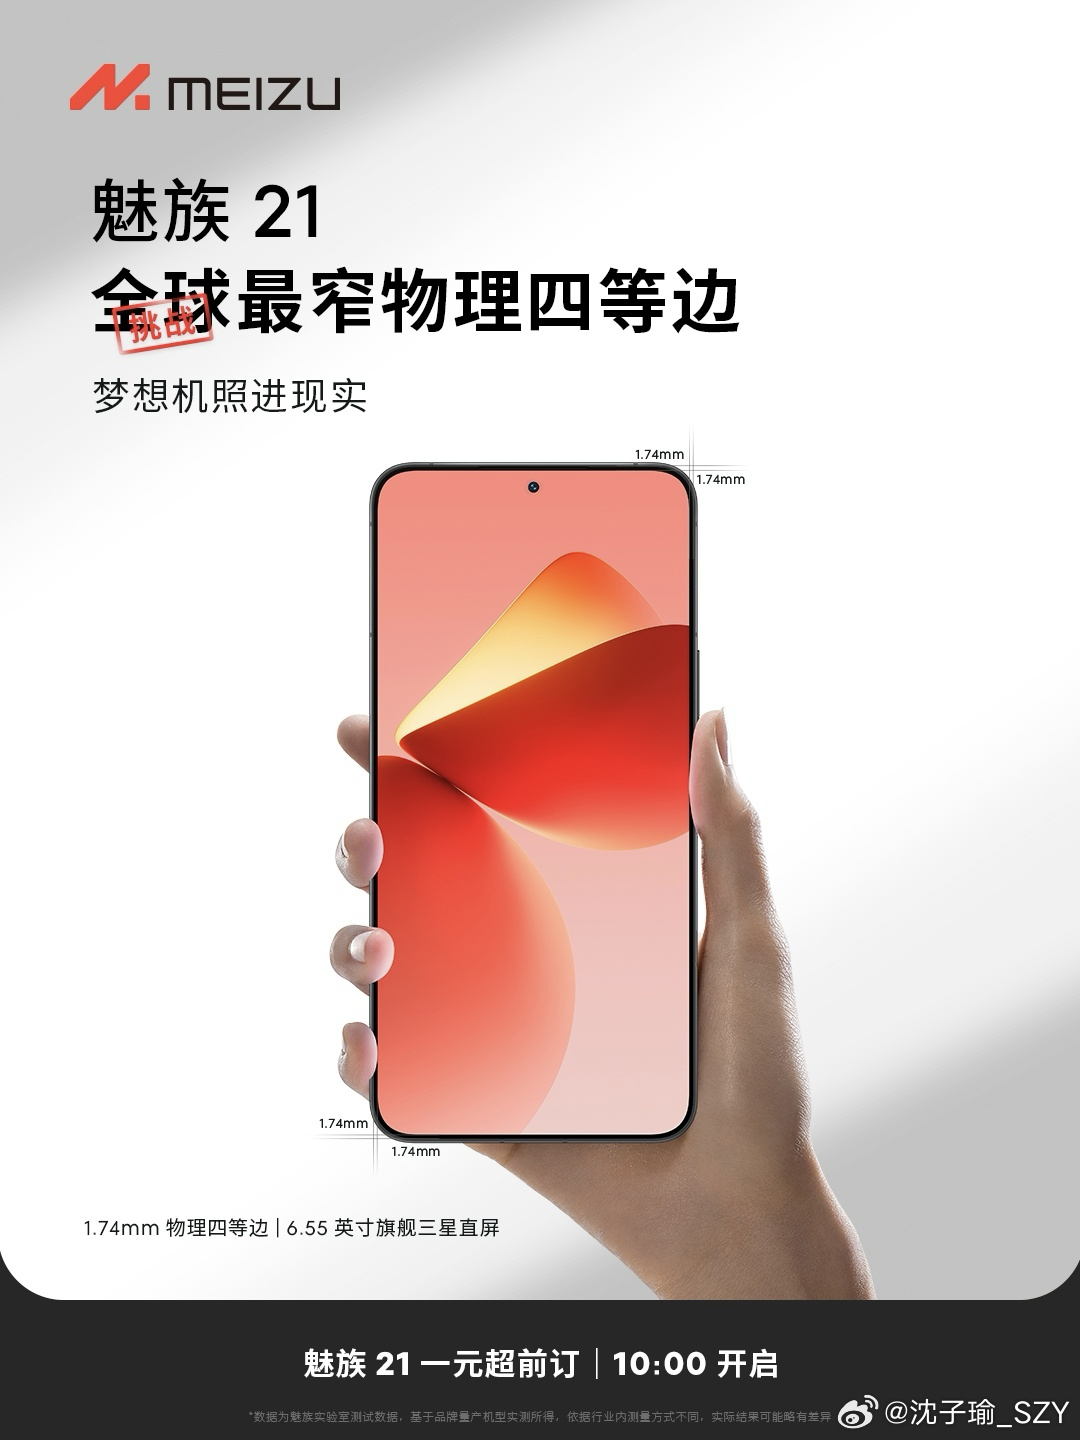 Meizu 21 is released, Meizu strives to break the dilemma with its appearance